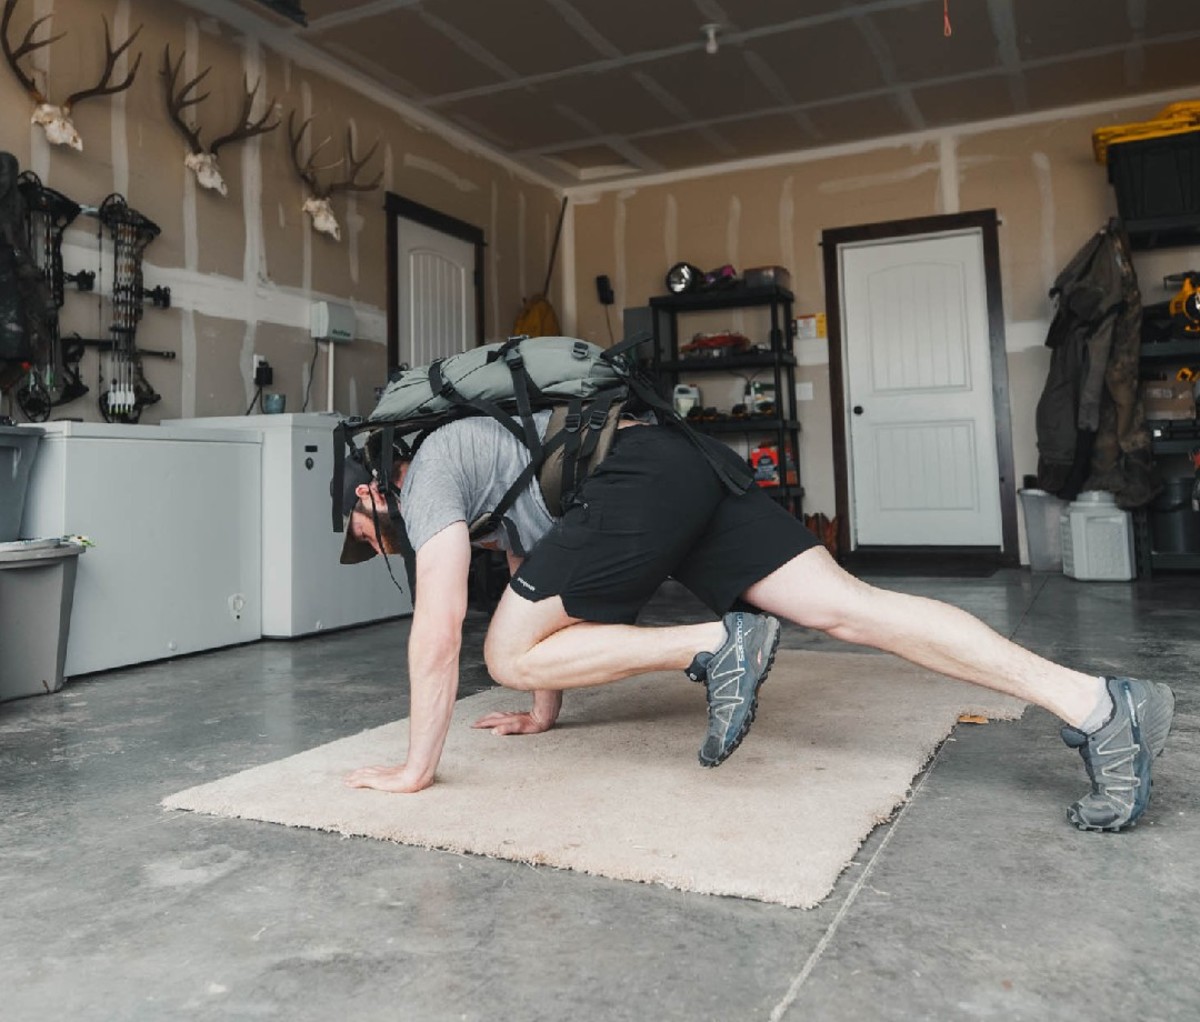 Guy working out in garage with backpack on, in forward stretch position.